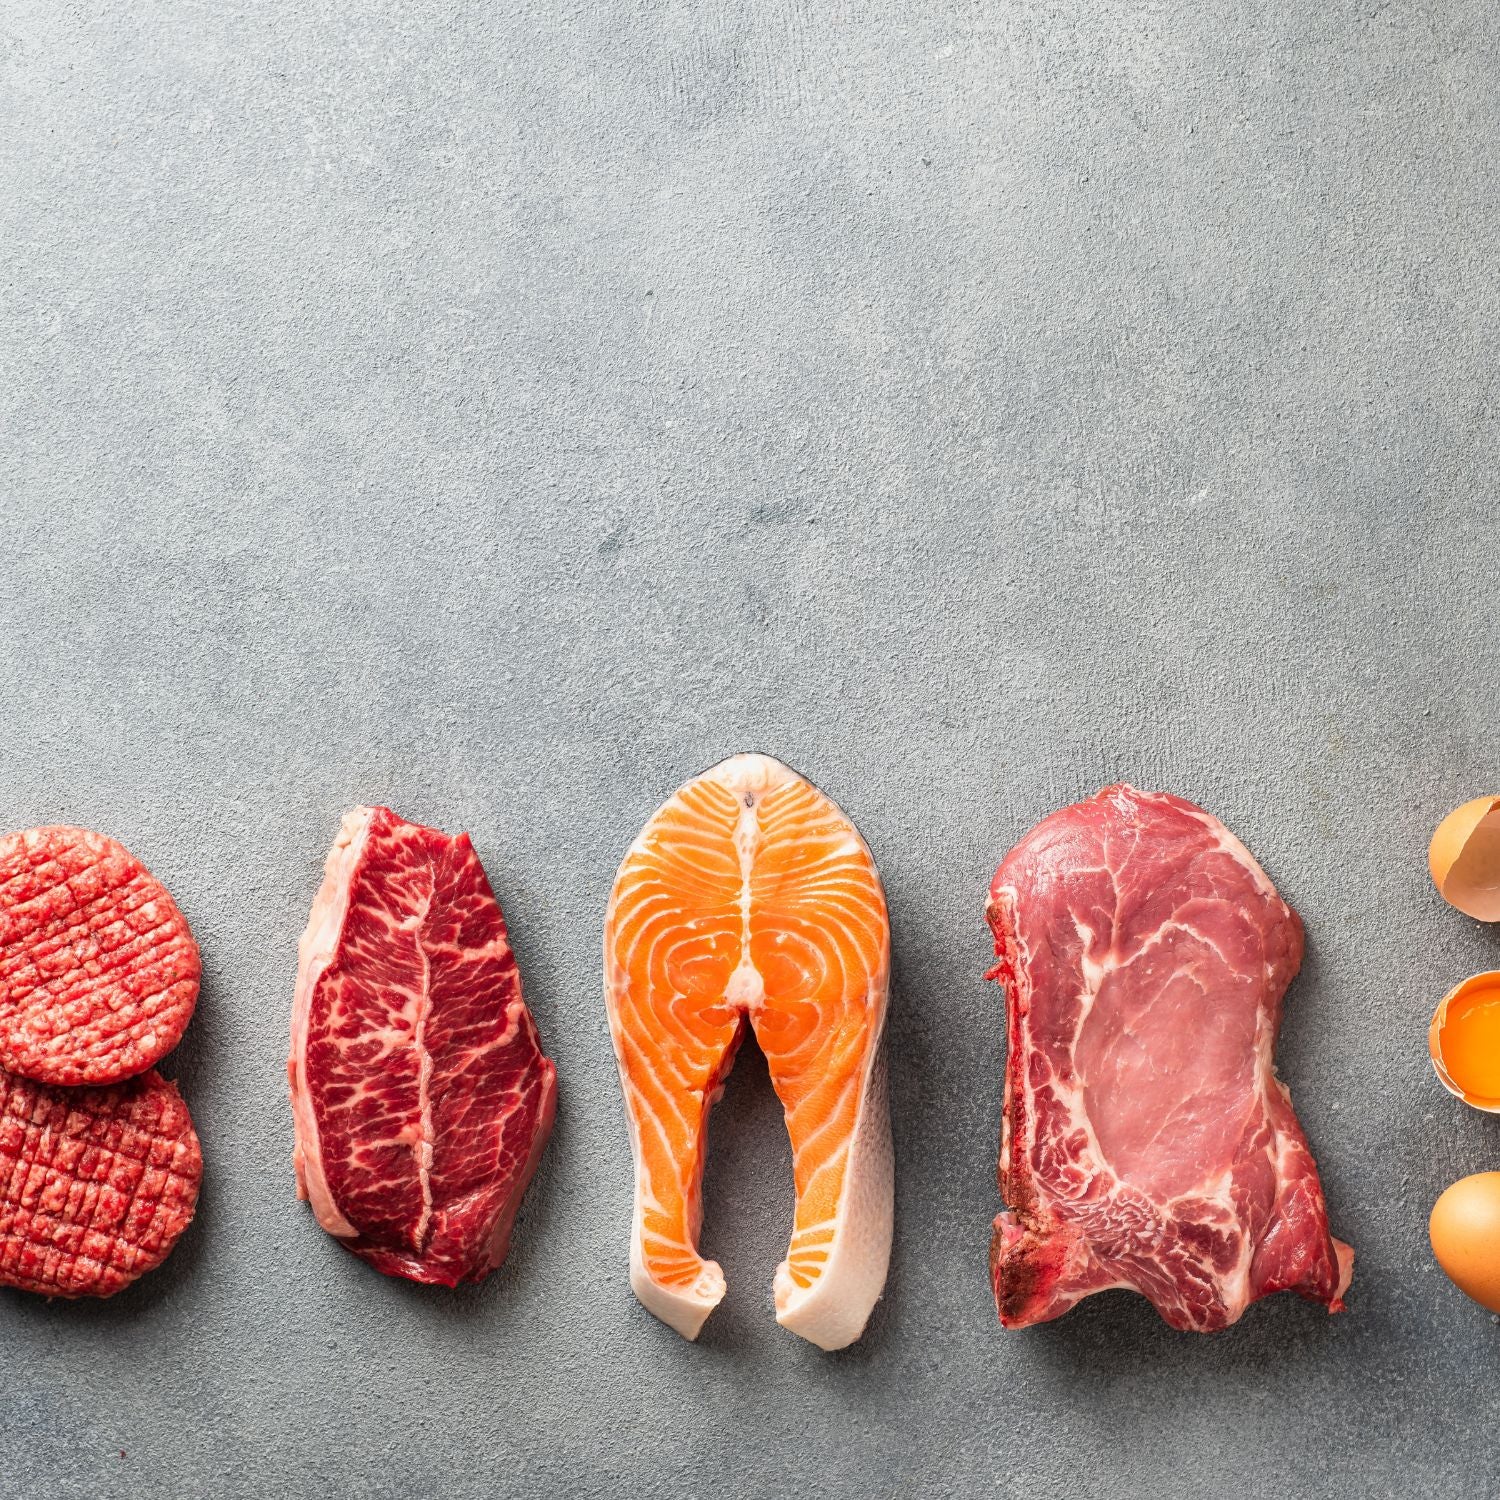 The Health of Eating Different Types of Meat | Nutrient-Rich Foods for a Healthy